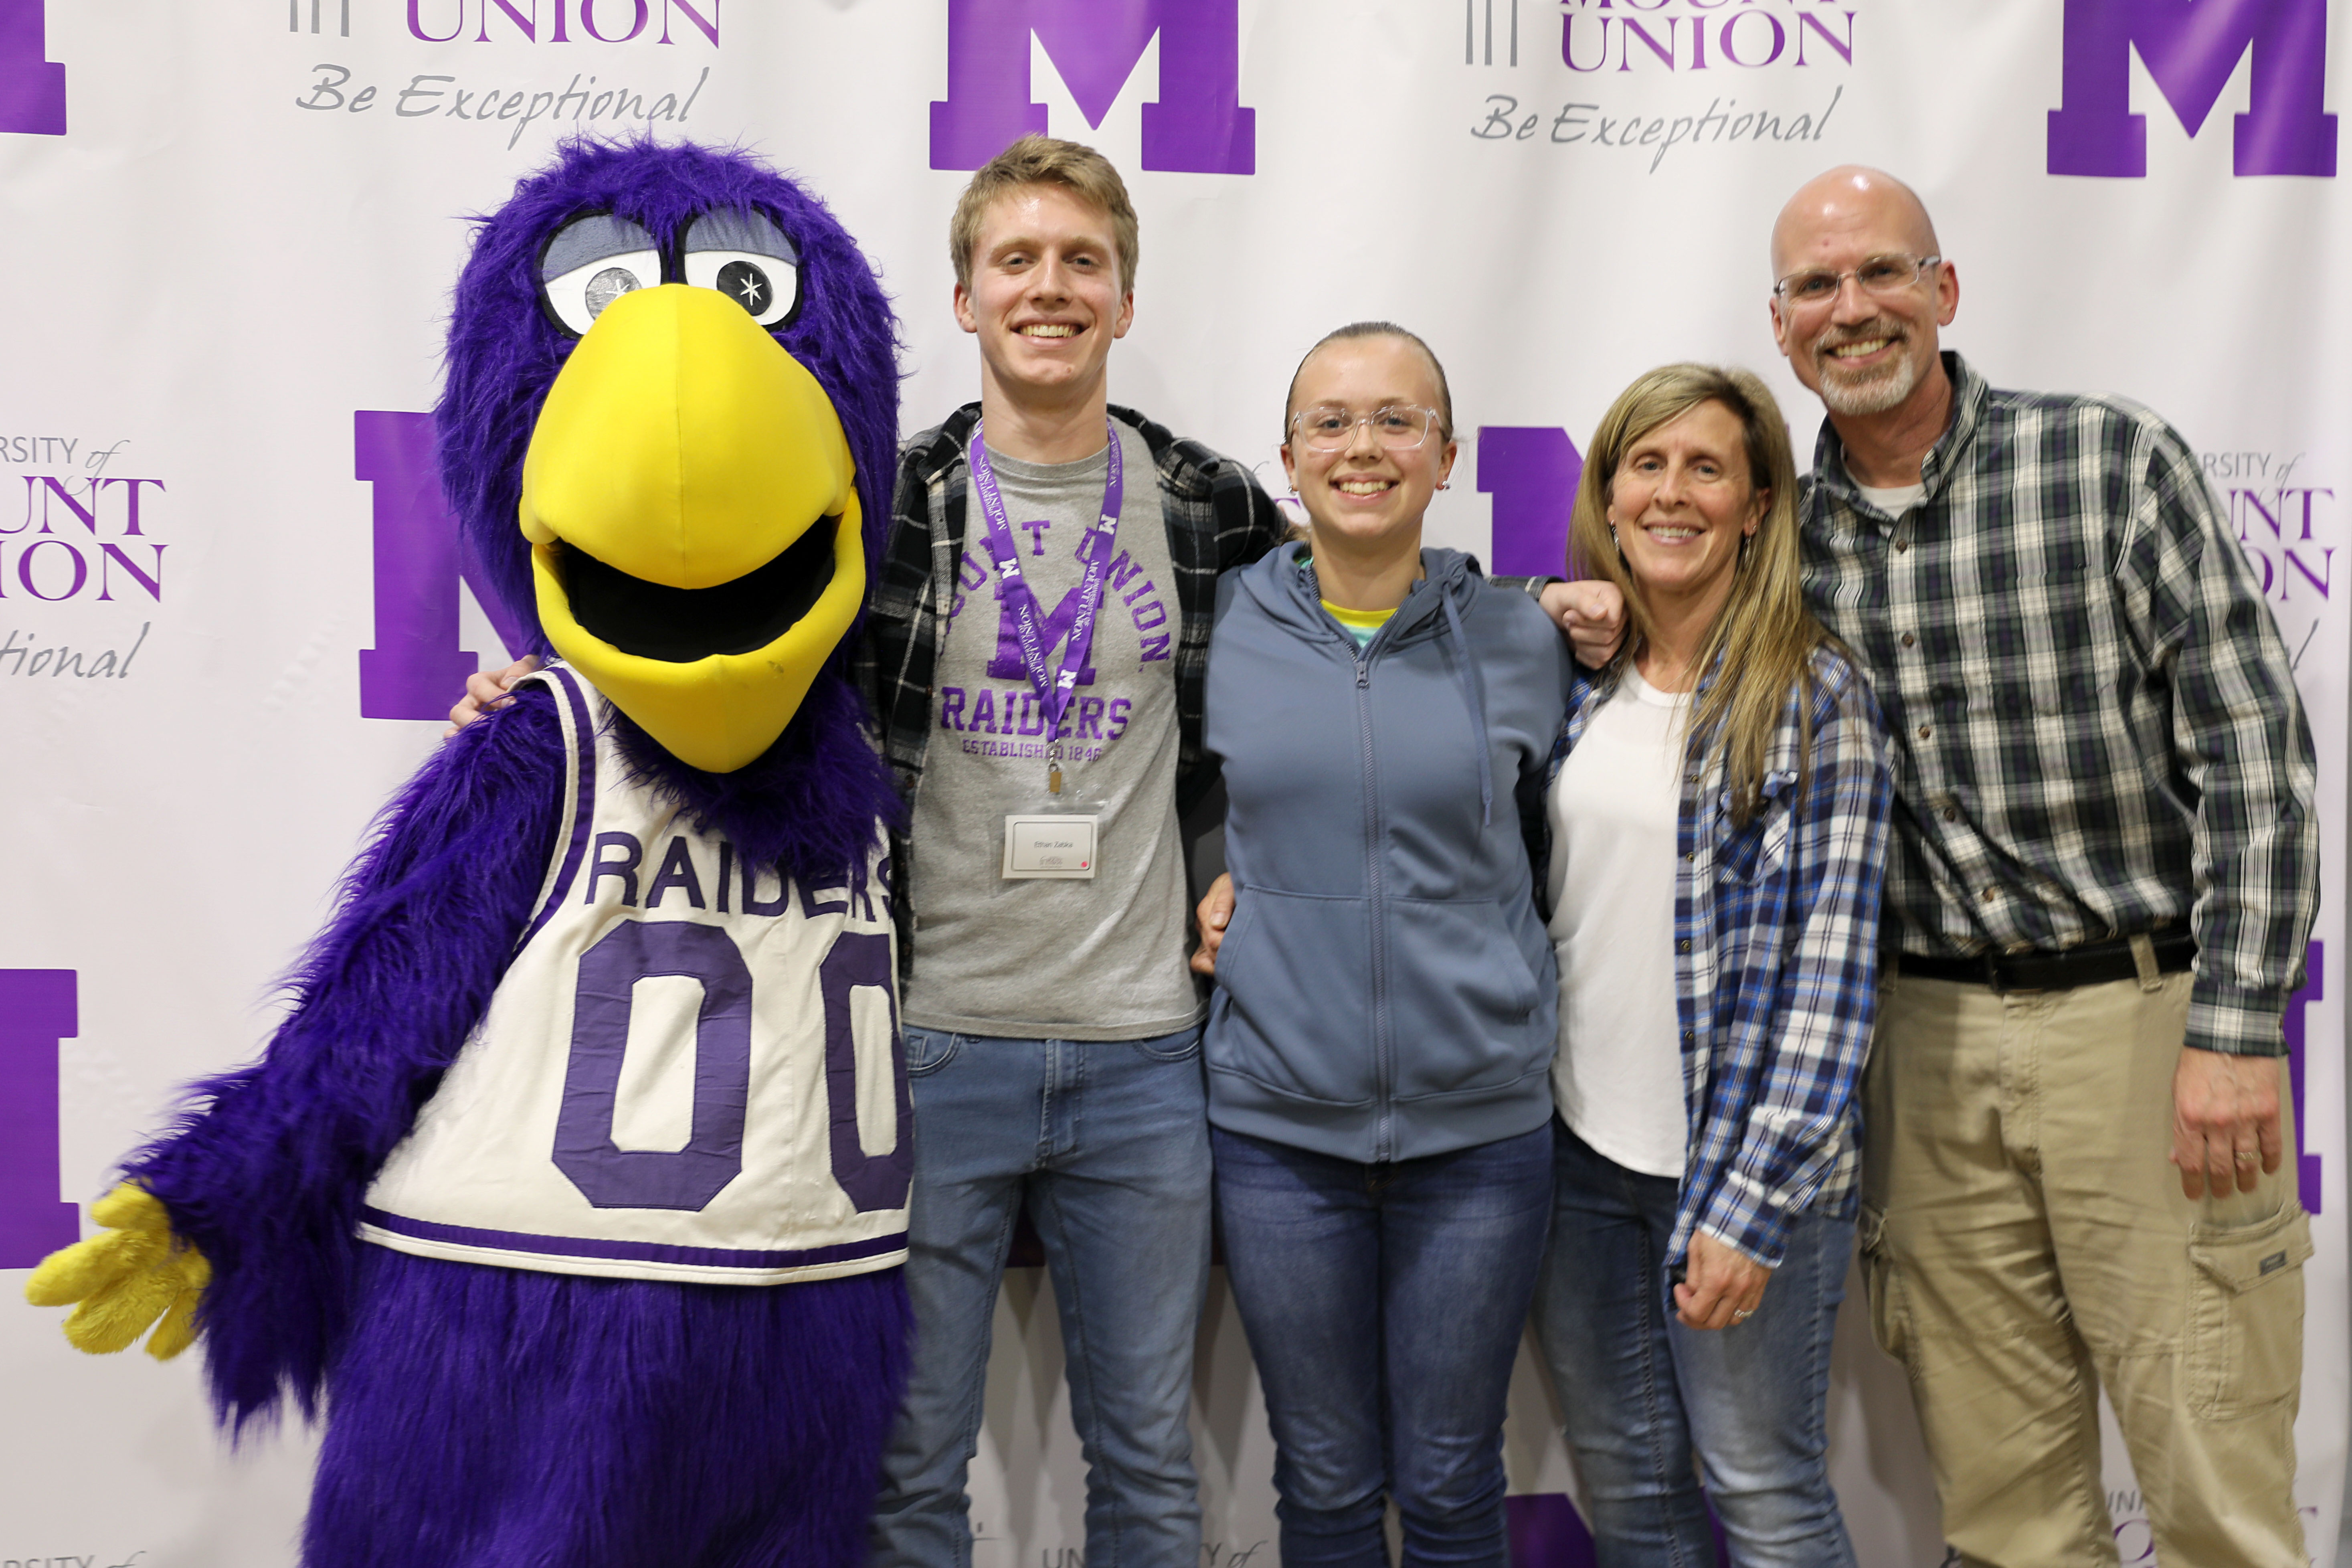 A Purple Raider family posing with MUcaw, Mount Union's mascot, during National Decision Day 2023.